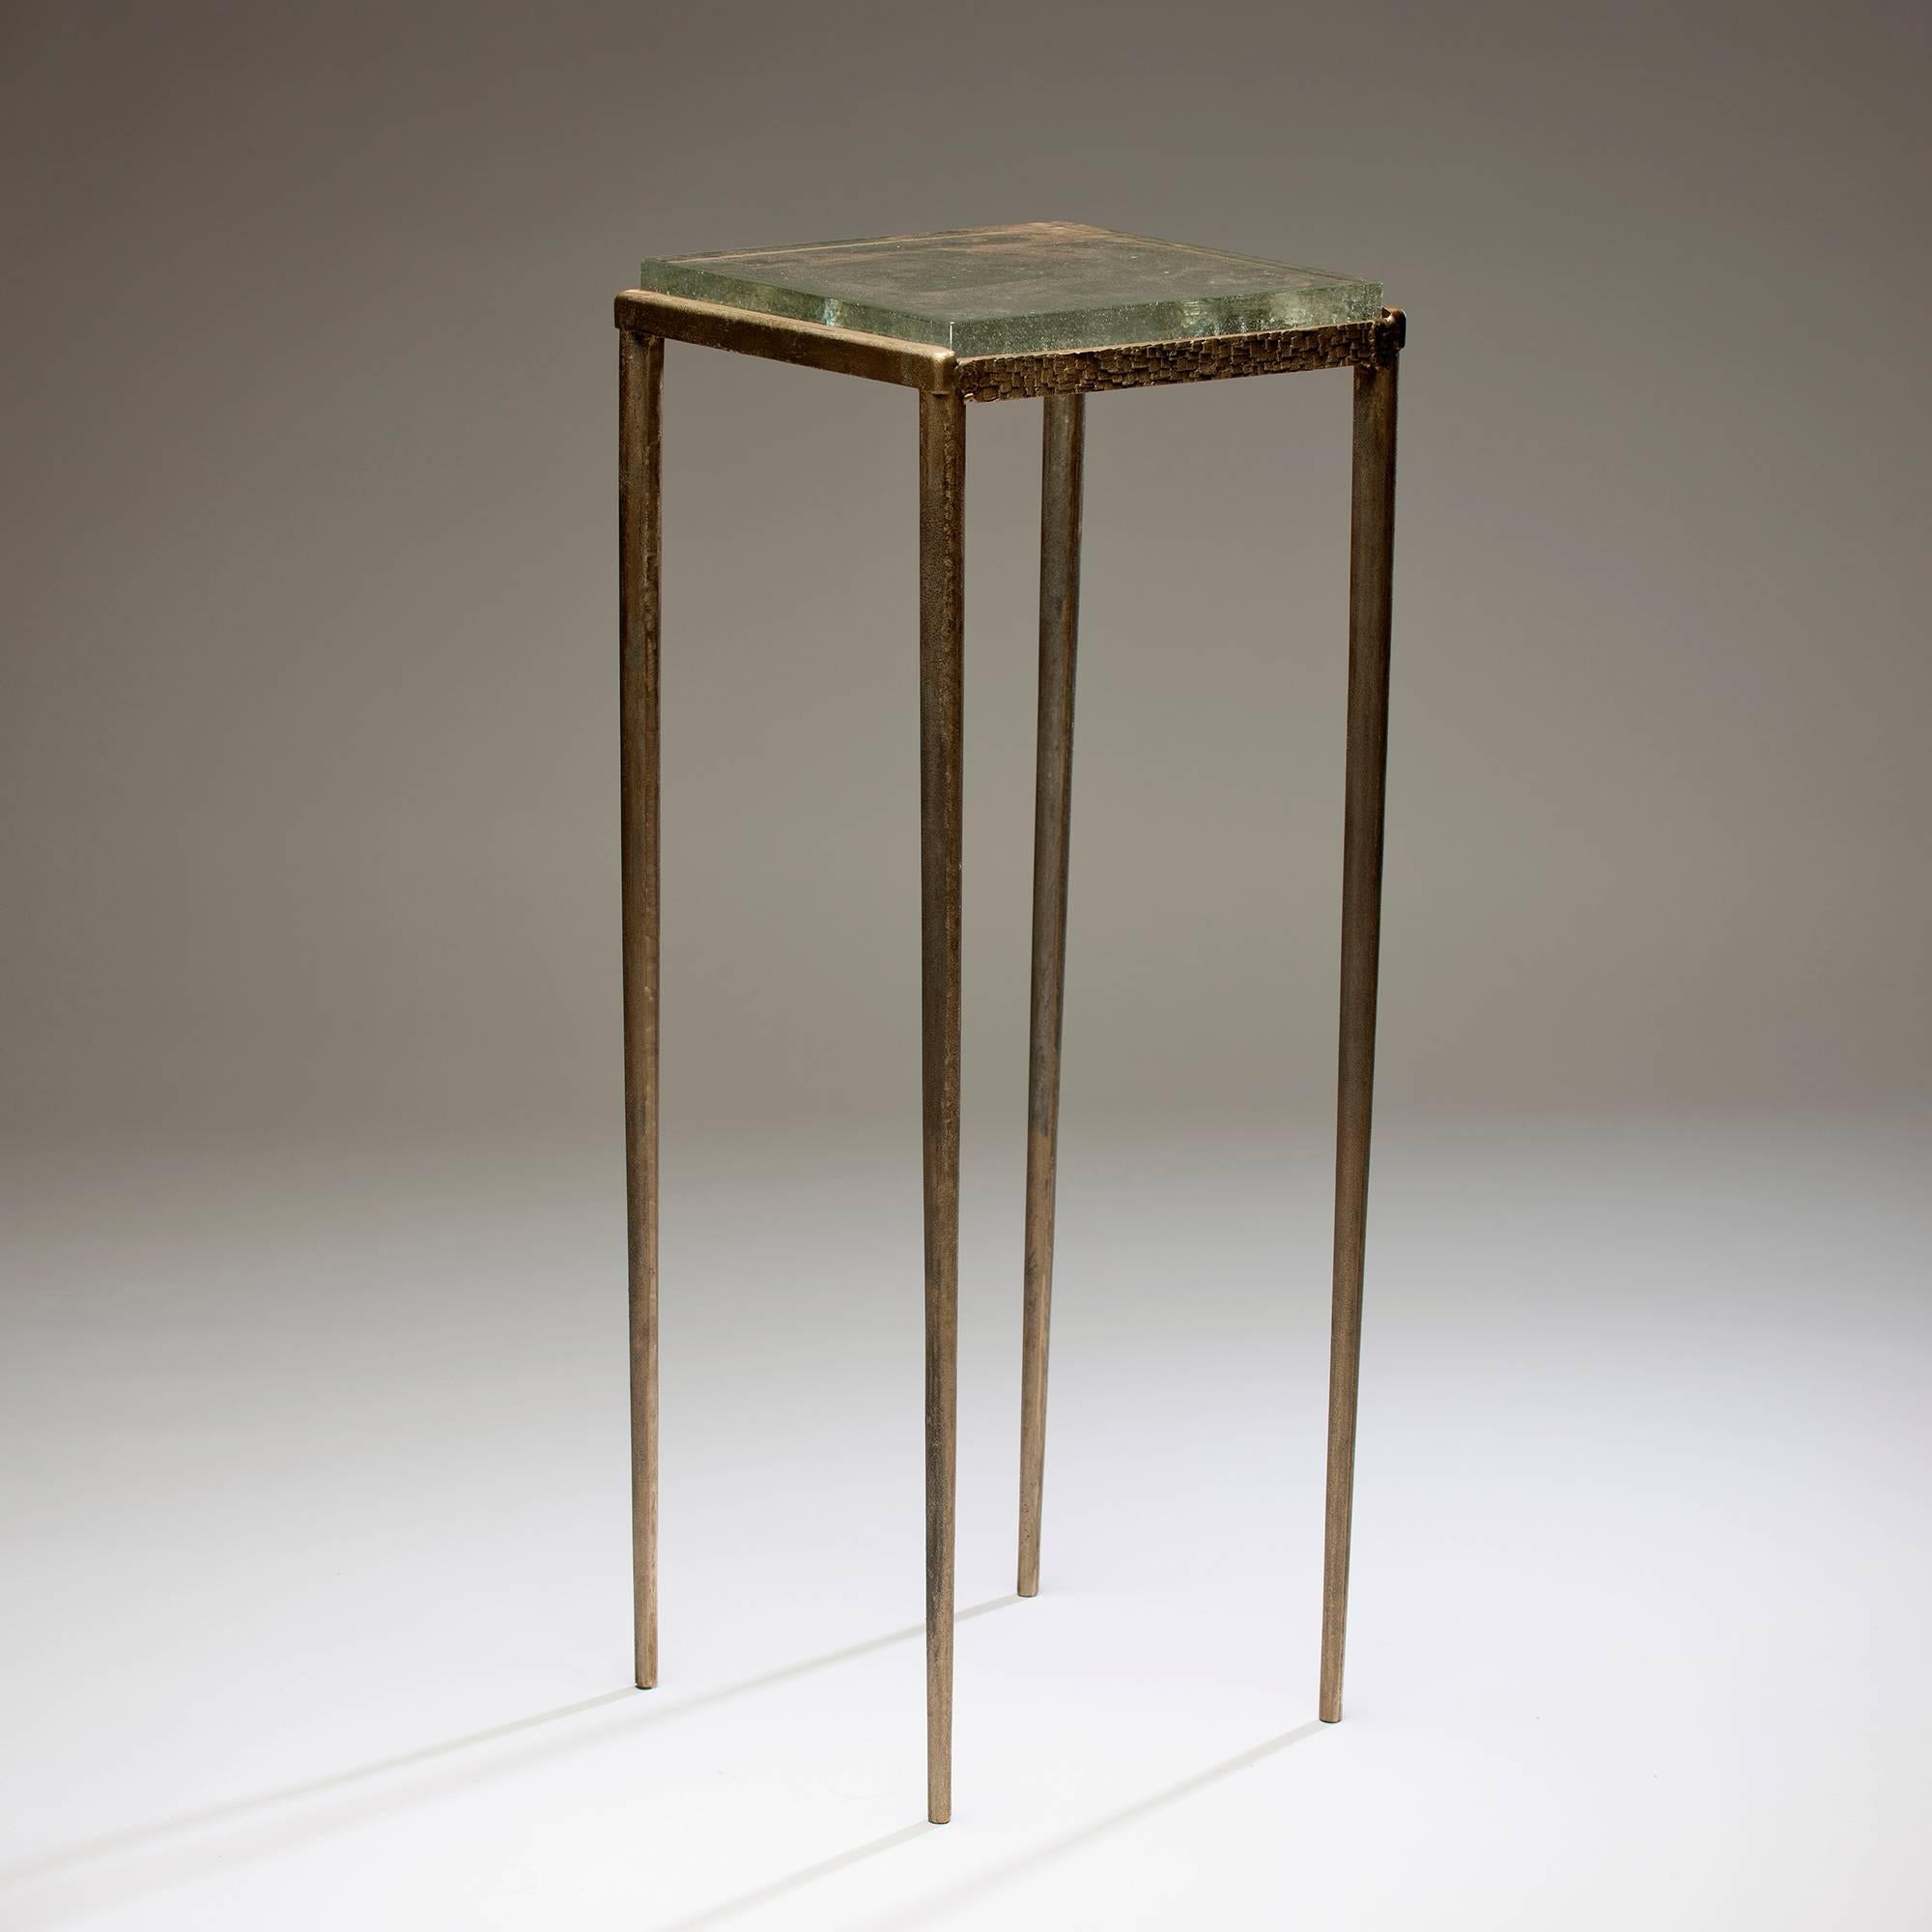 Gregory Nangle fabricated Ash Side Table out of cast bronze and glass; it is an edition of 6.

The Gregory Nangle aesthetic explores what happens when geometry is interjected into nature. His work juxtaposes Minimalist geometry with forms or